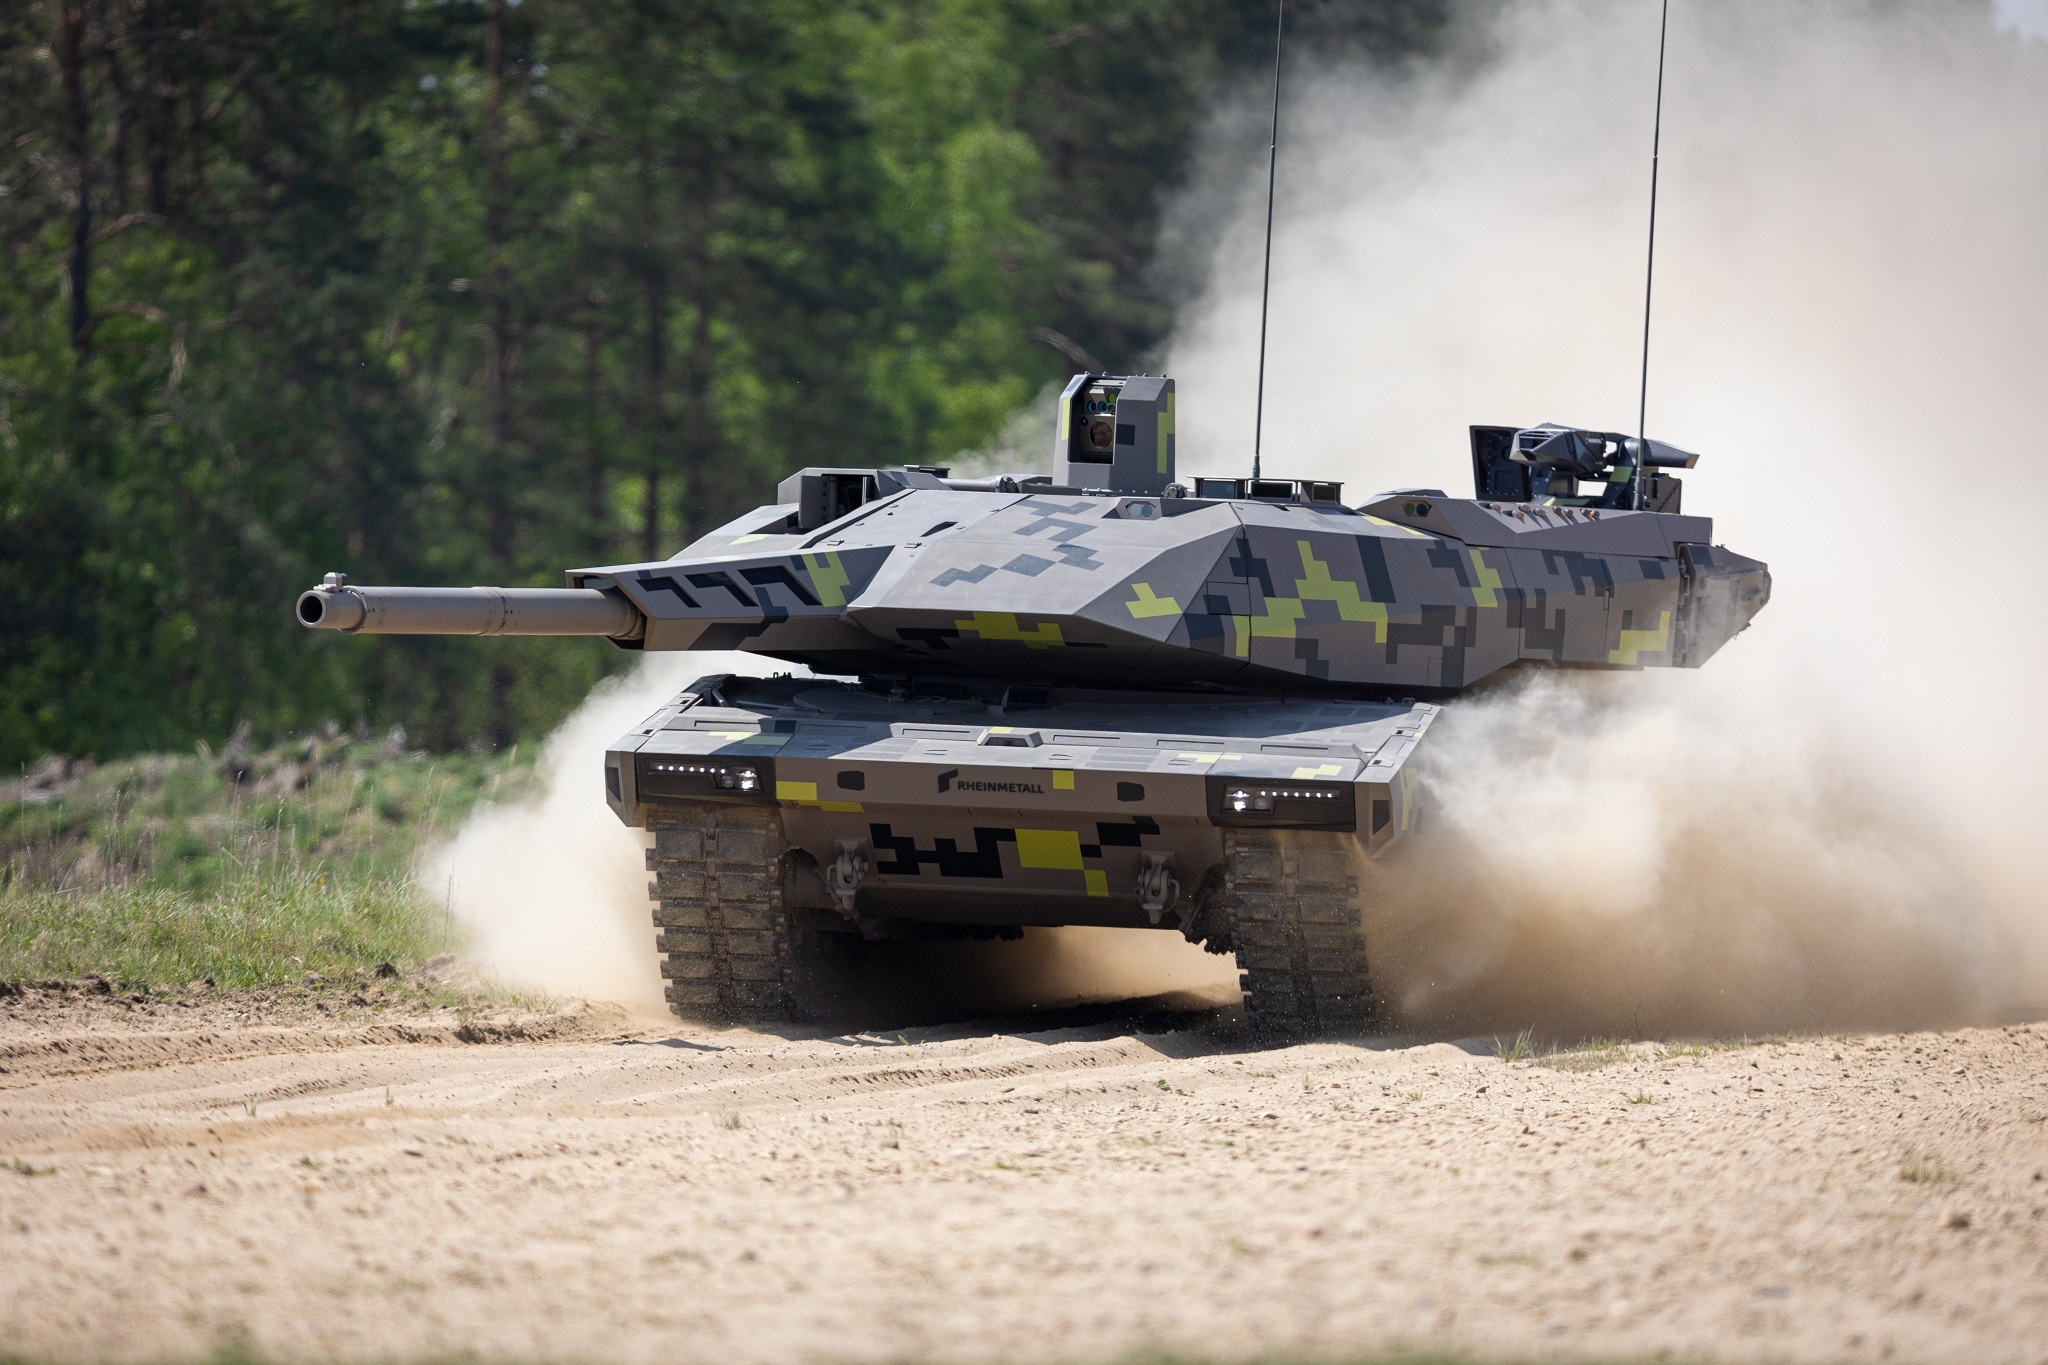 A Challenger 2 tank with extra armour fitted in the form of heavy